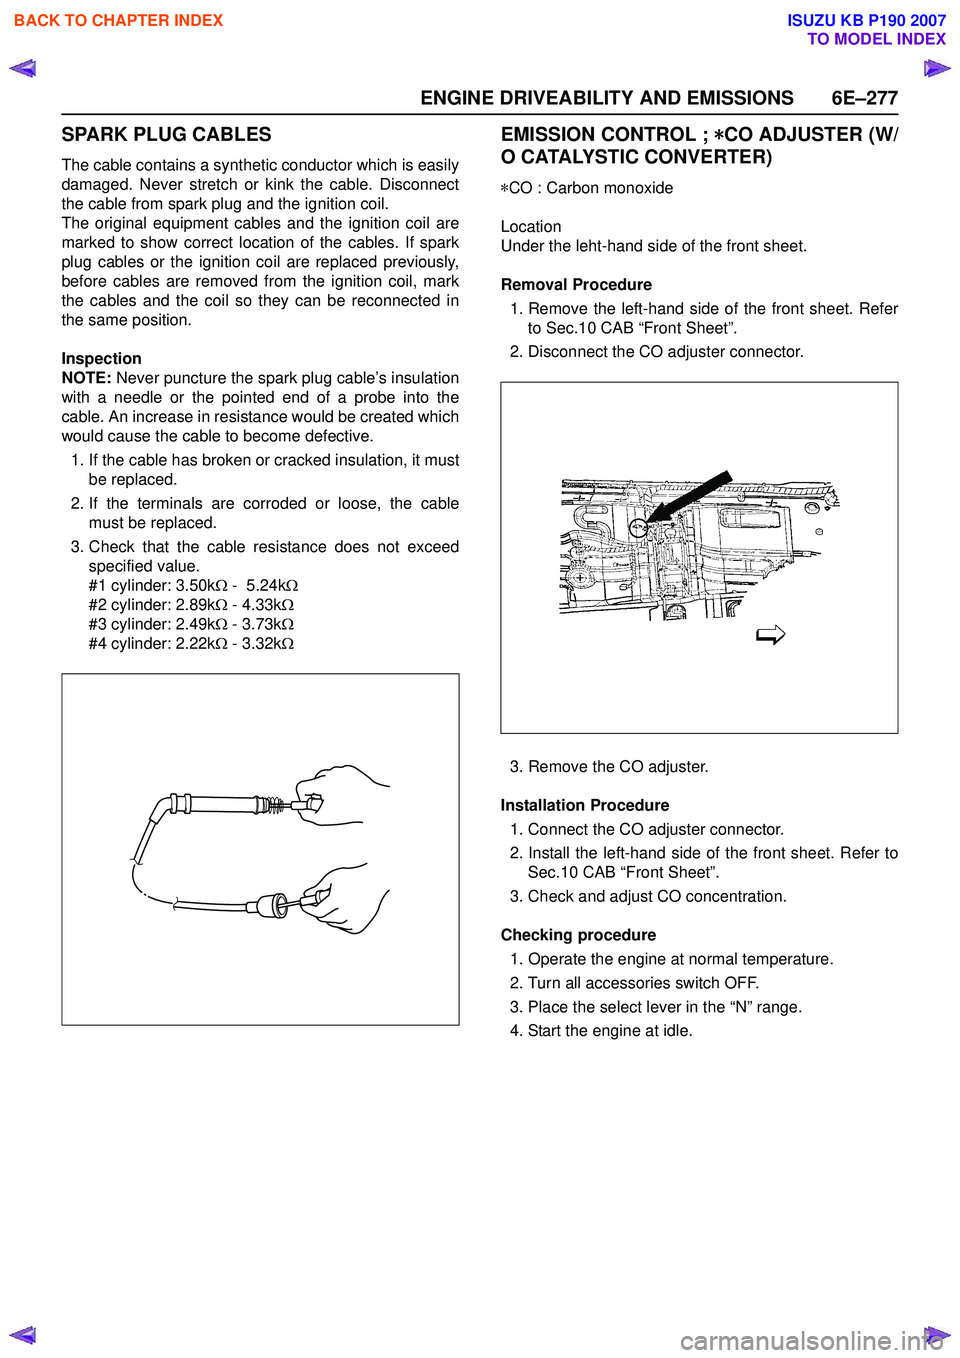 ISUZU KB P190 2007  Workshop Repair Manual ENGINE DRIVEABILITY AND EMISSIONS 6E–277
SPARK PLUG CABLES
The cable contains a synthetic conductor which is easily 
damaged. Never stretch or kink the cable. Disconnect
the cable from spark plug an